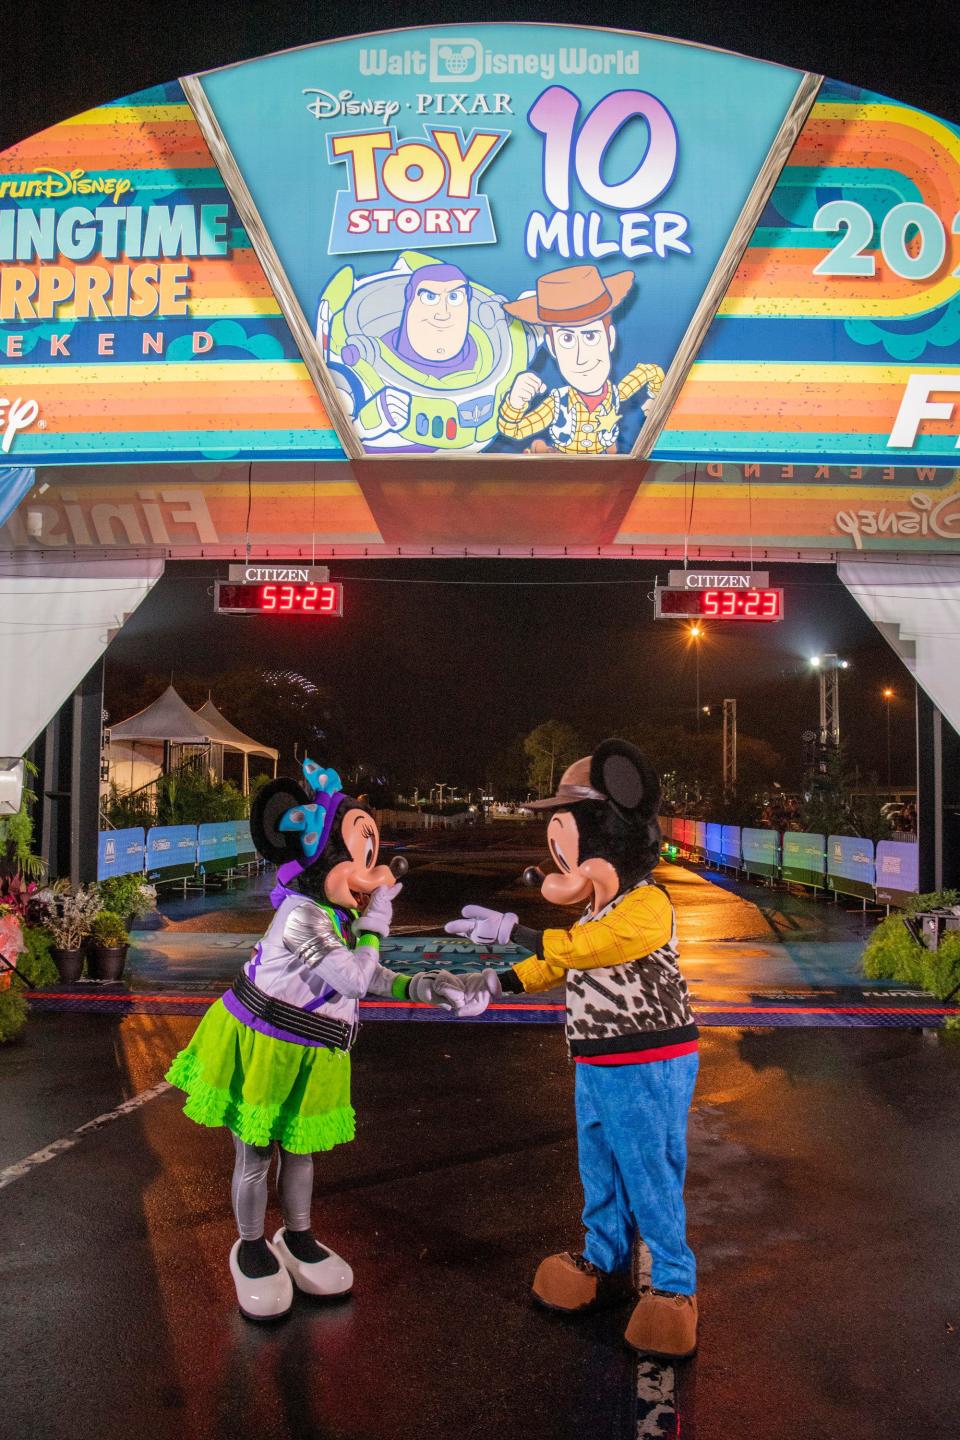 Mickey Mouse and Minnie Mouse pose near the finish line as they await the first finishers of the Disney Pixar Toy Story 10-Miler during runDisney Springtime Surprise Weekend on April 16, 2023, at Walt Disney World Resort in Lake Buena Vista, Fla. (Kent Phillips, photographer)